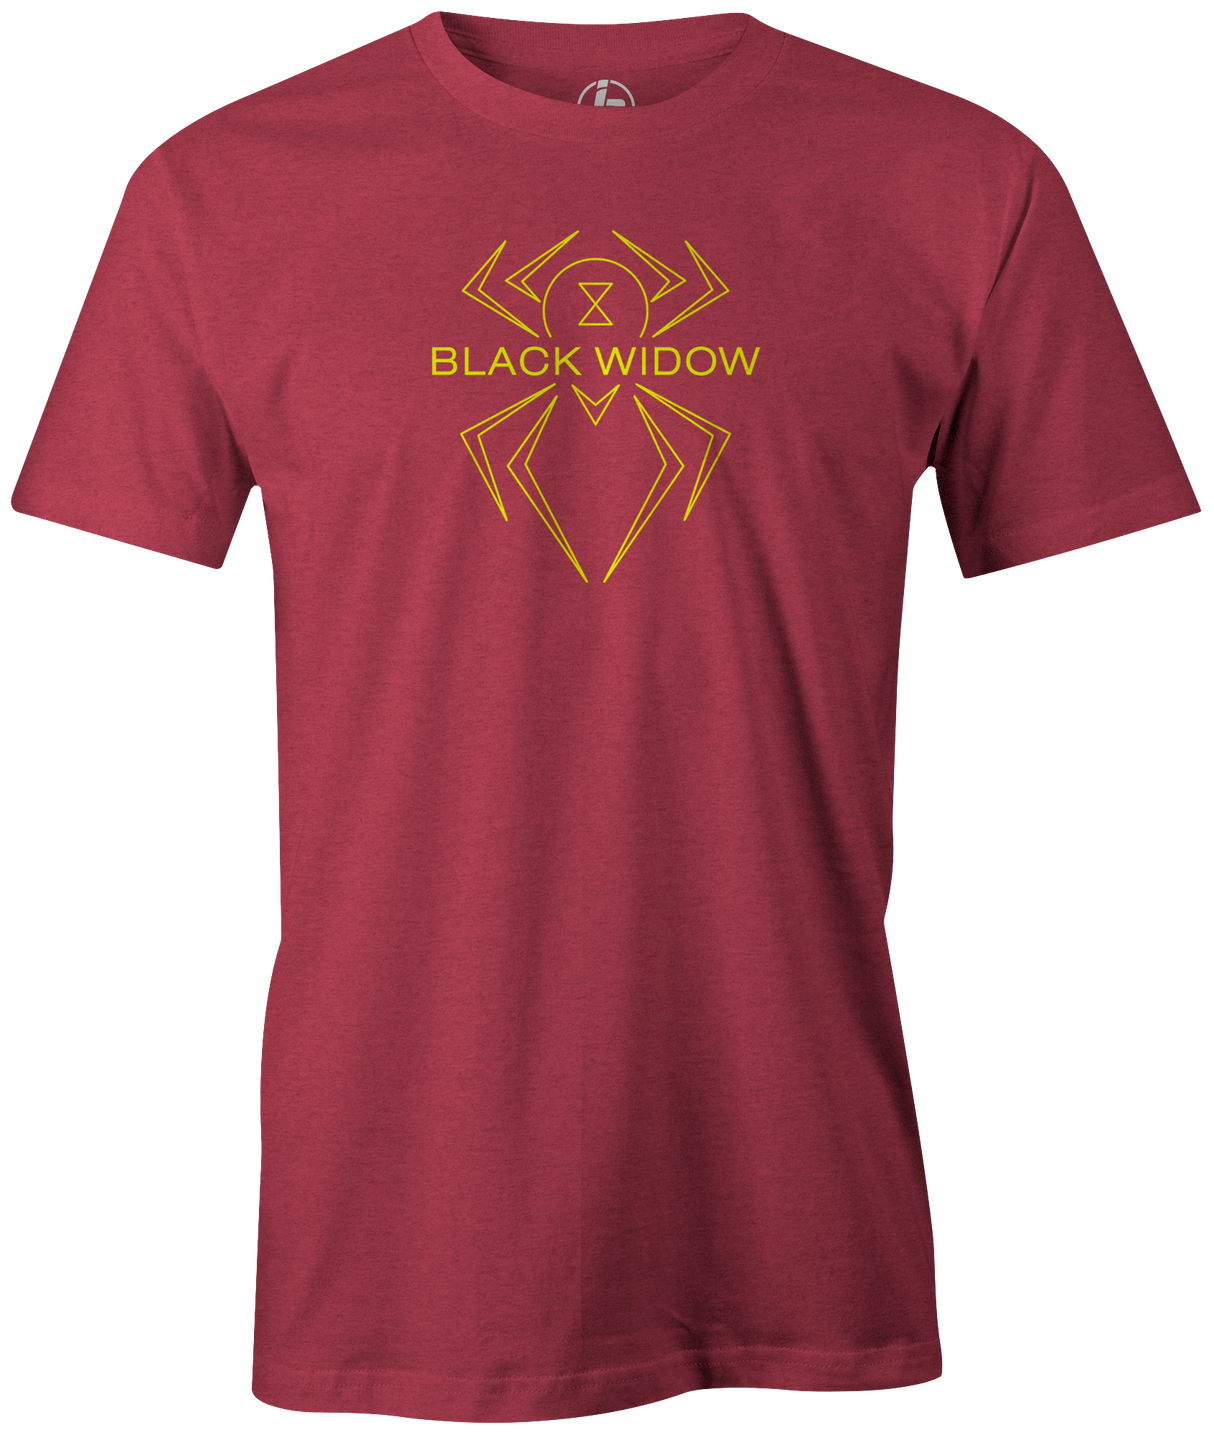 The latest in Hammer Bowling's Black Widow Series, the new Black Widow 2.0 Hybird. It's Hammer Time! Wear this iconic logo with pride. Grab this classic Hammer t-shirt and hit the lanes! This is the perfect gift for all Hammer fans! Bill o'neill, Tshirt, tee, tee-shirt, tee shirt, Pro shop. League bowling team shirt. PBA. PWBA. USBC. Junior Gold. Youth bowling. Tournament t-shirt. Men's. Bowling Ball.